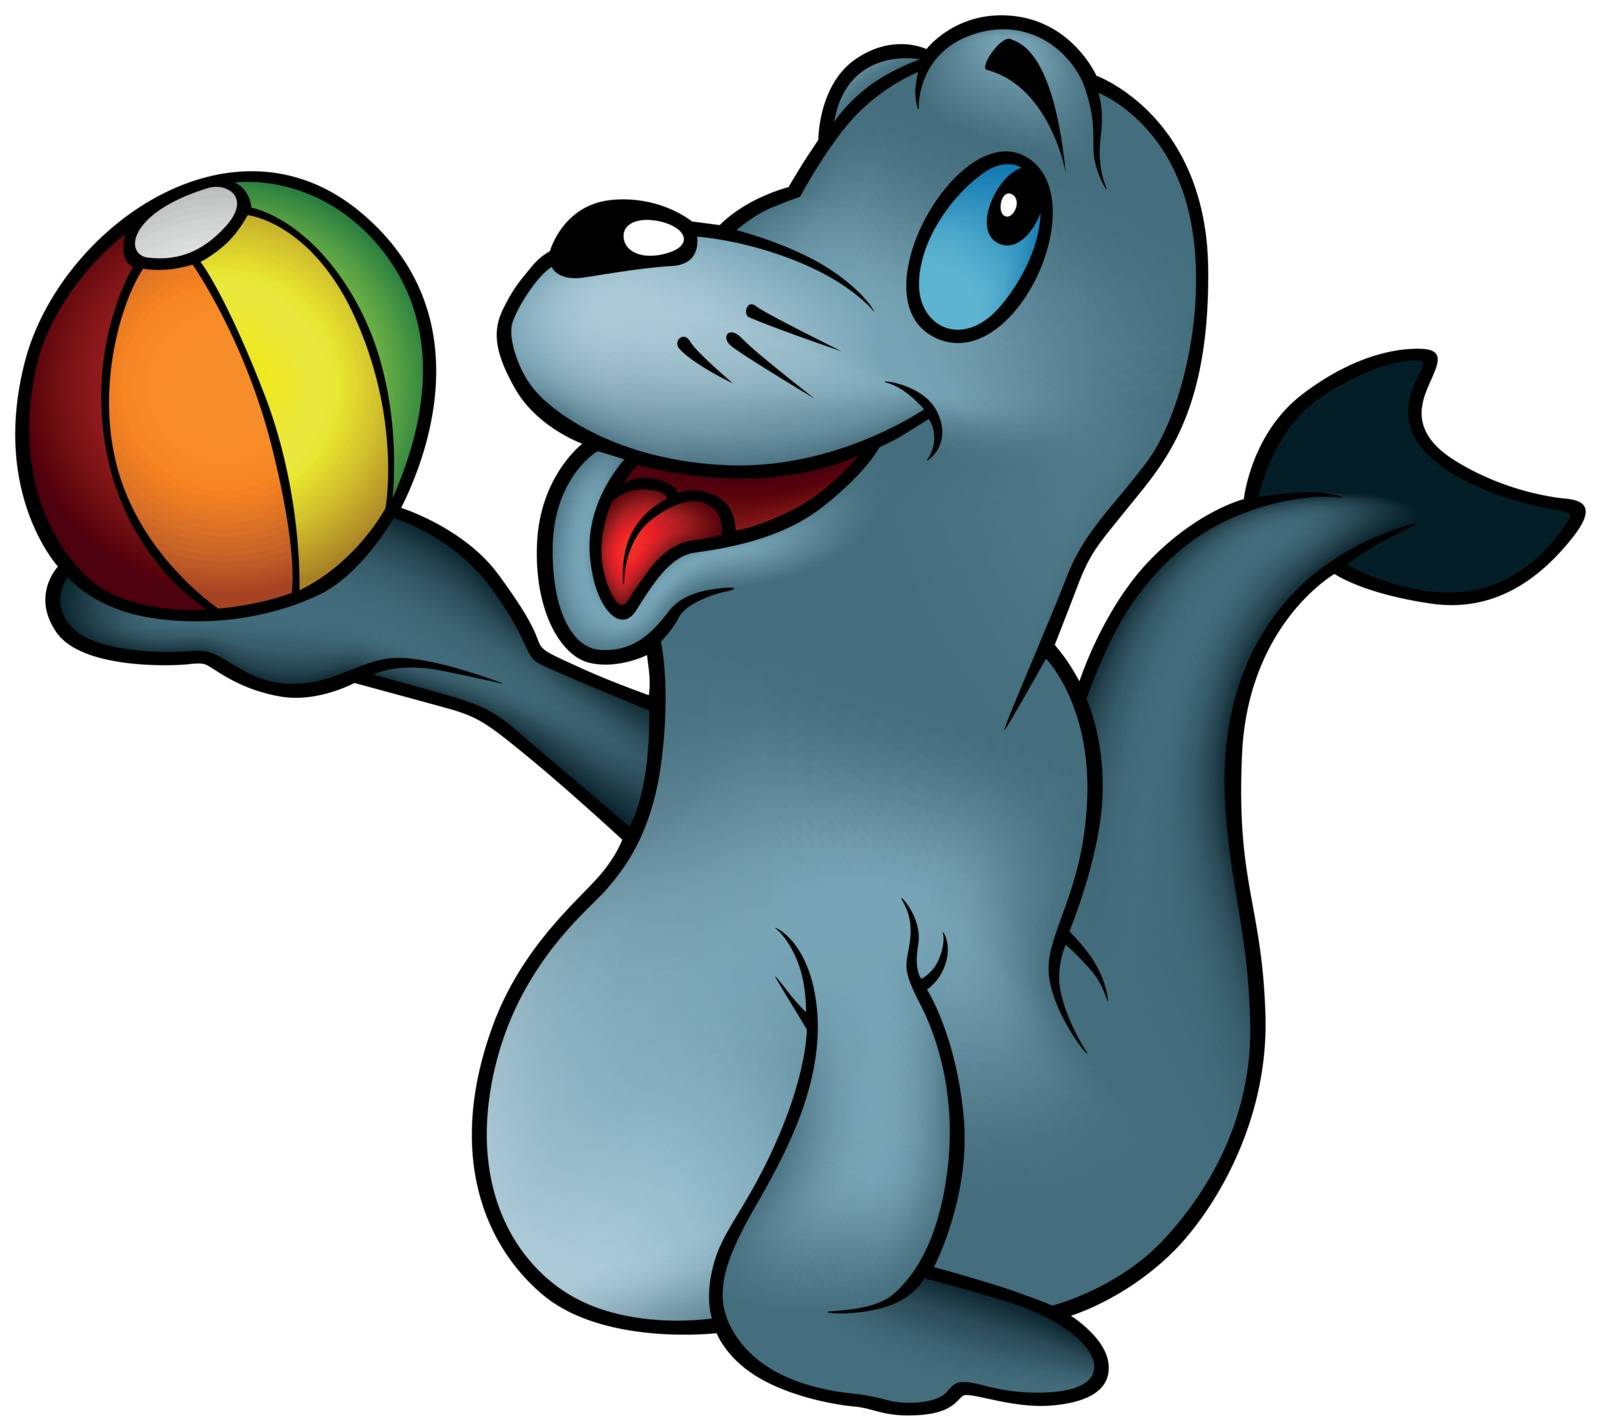 Seal playing With a Ball by illustratorCZ